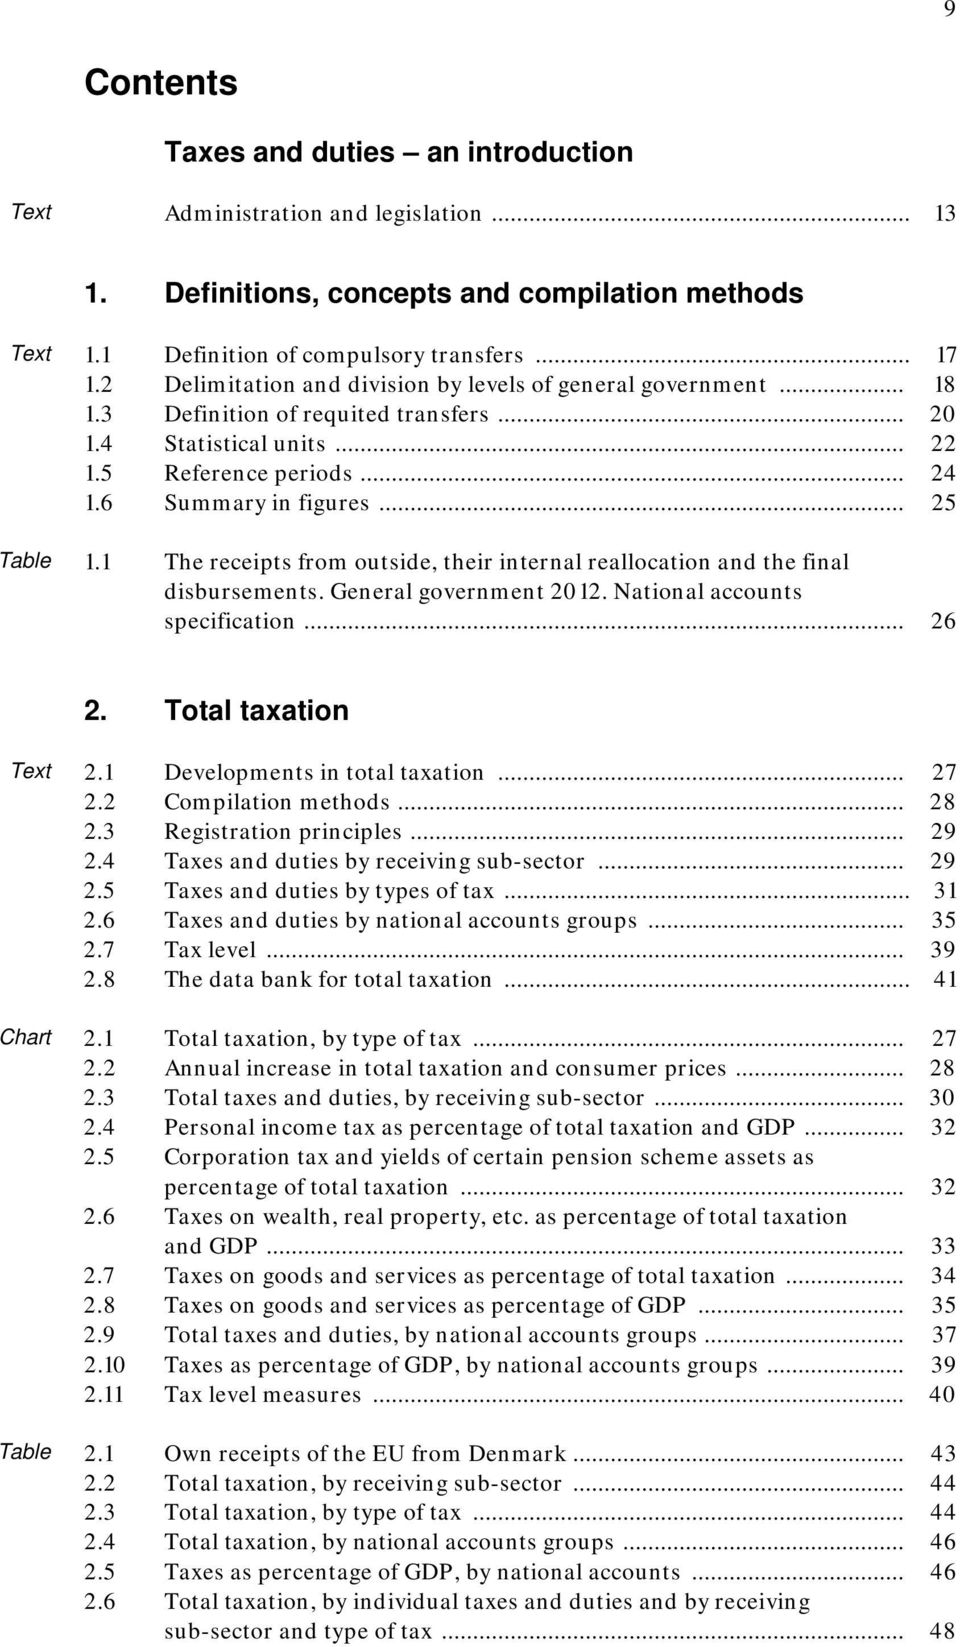 1 The receipts from outside, their internal reallocation and the final disbursements. General government 2012. National accounts specification... 26 2. Total taxation Text Chart Table 2.